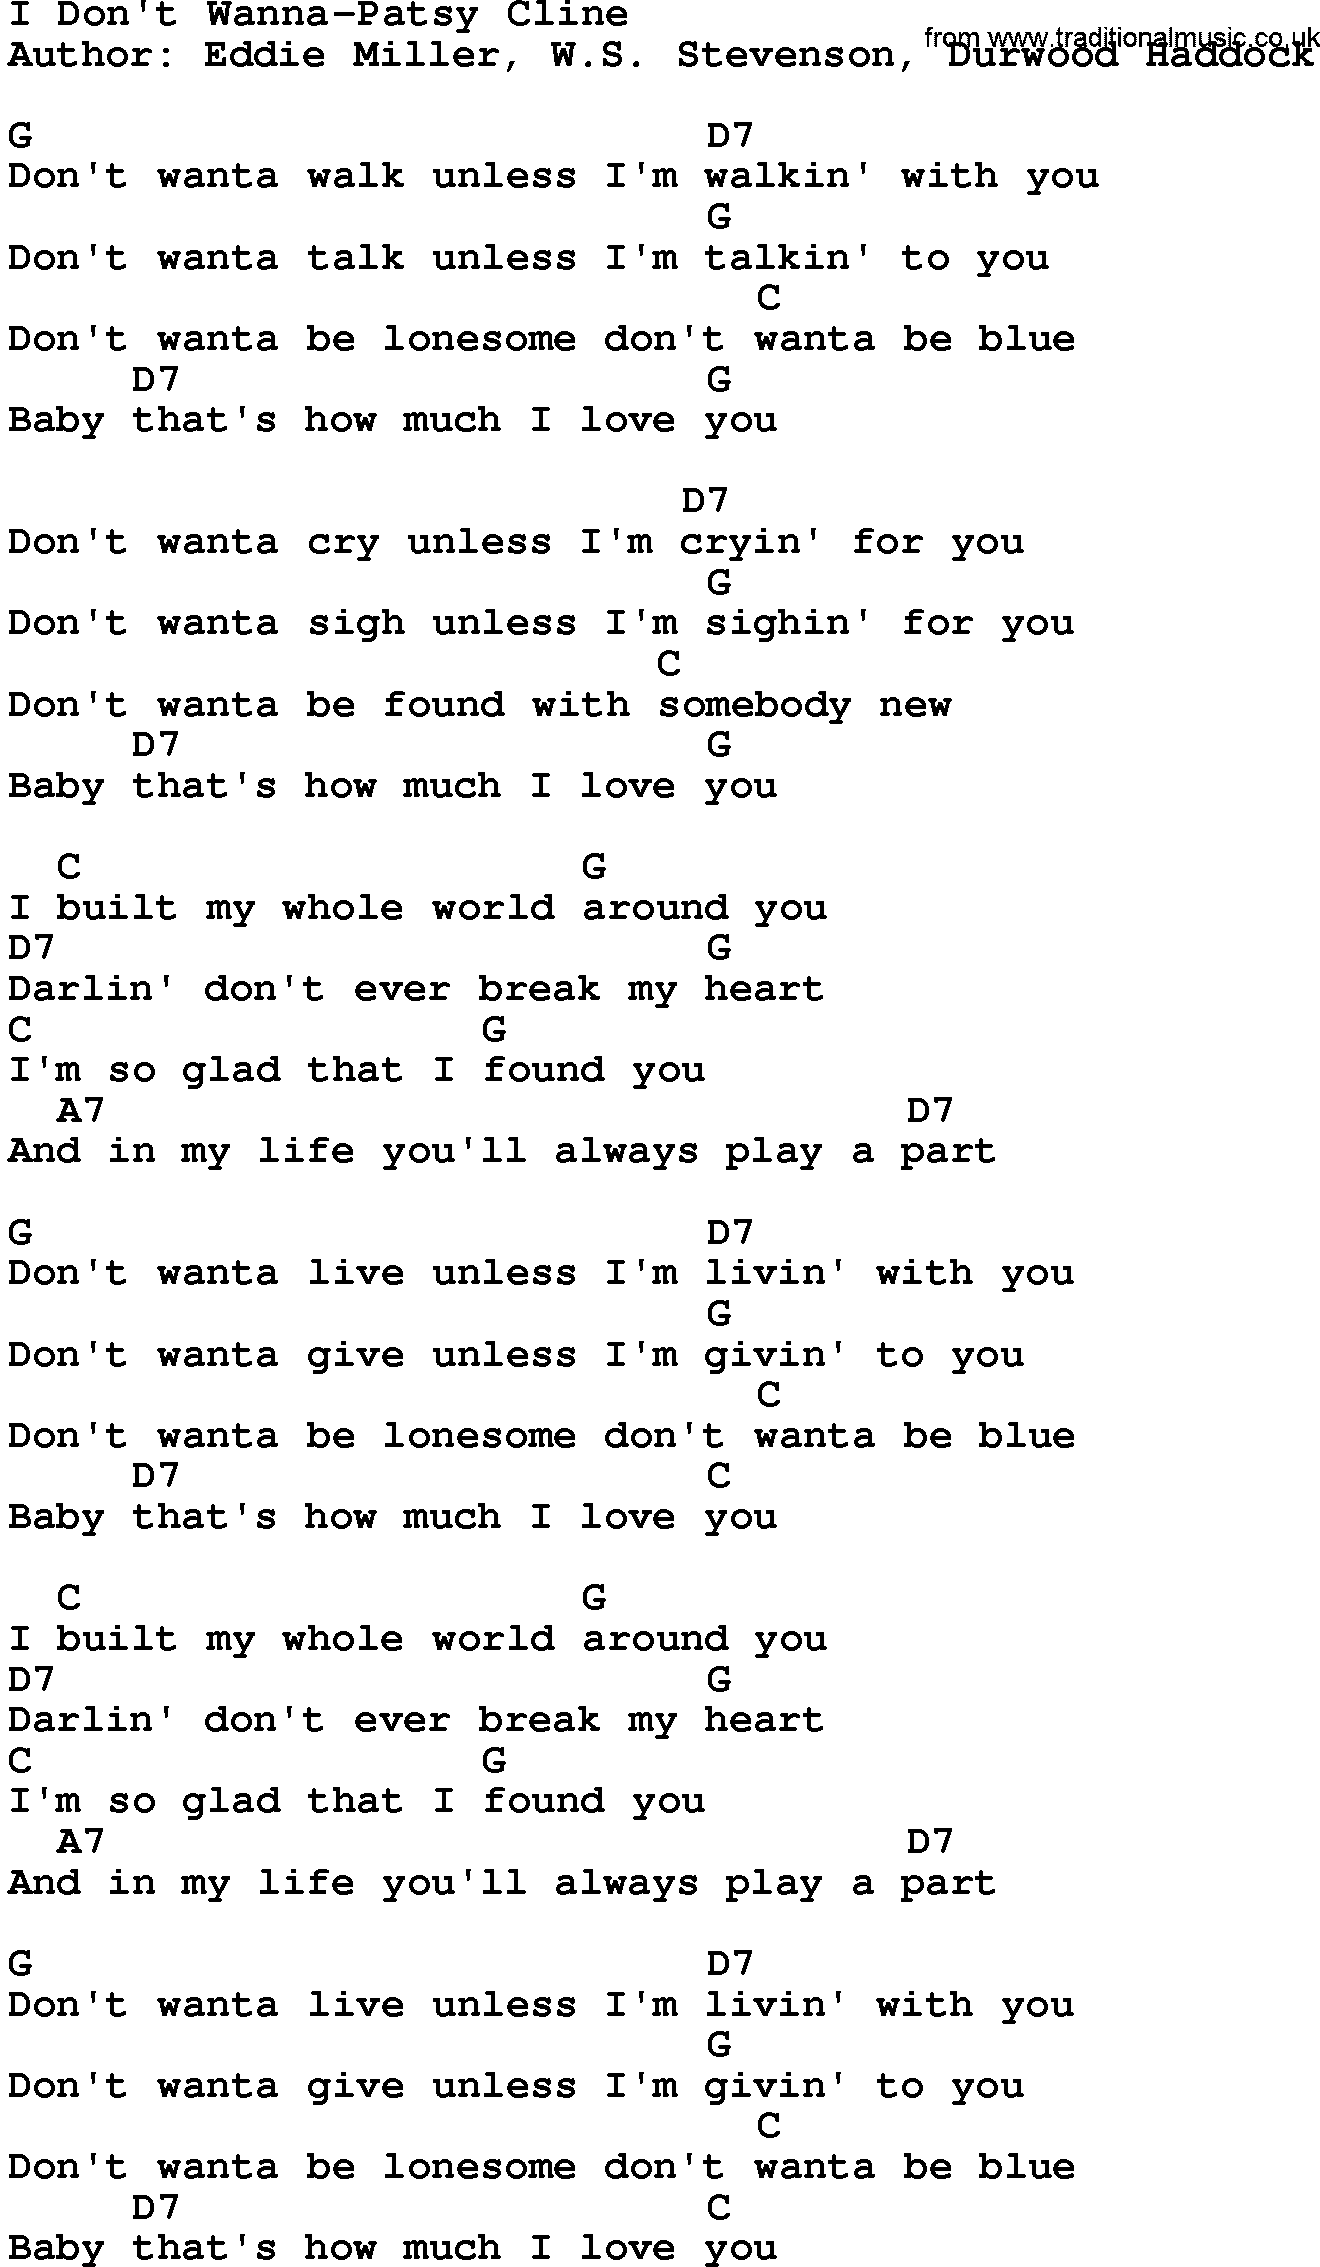 Country music song: I Don't Wanna-Patsy Cline lyrics and chords